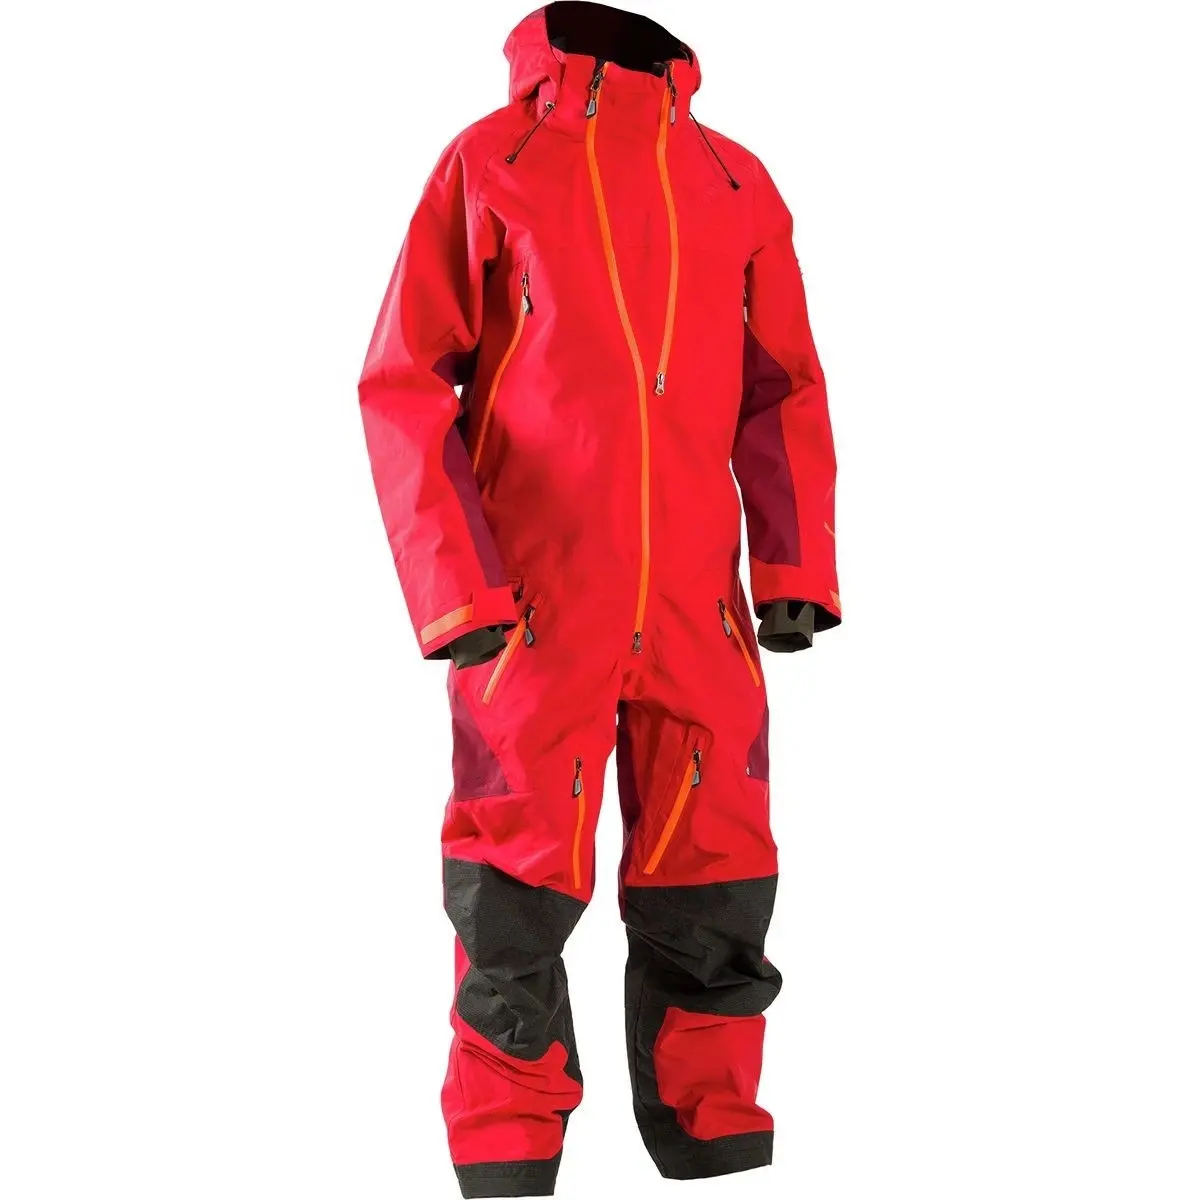 LF-Filling overall ski suits snowboarding jumpsuits one pieces mens snow pants waterproof insulated